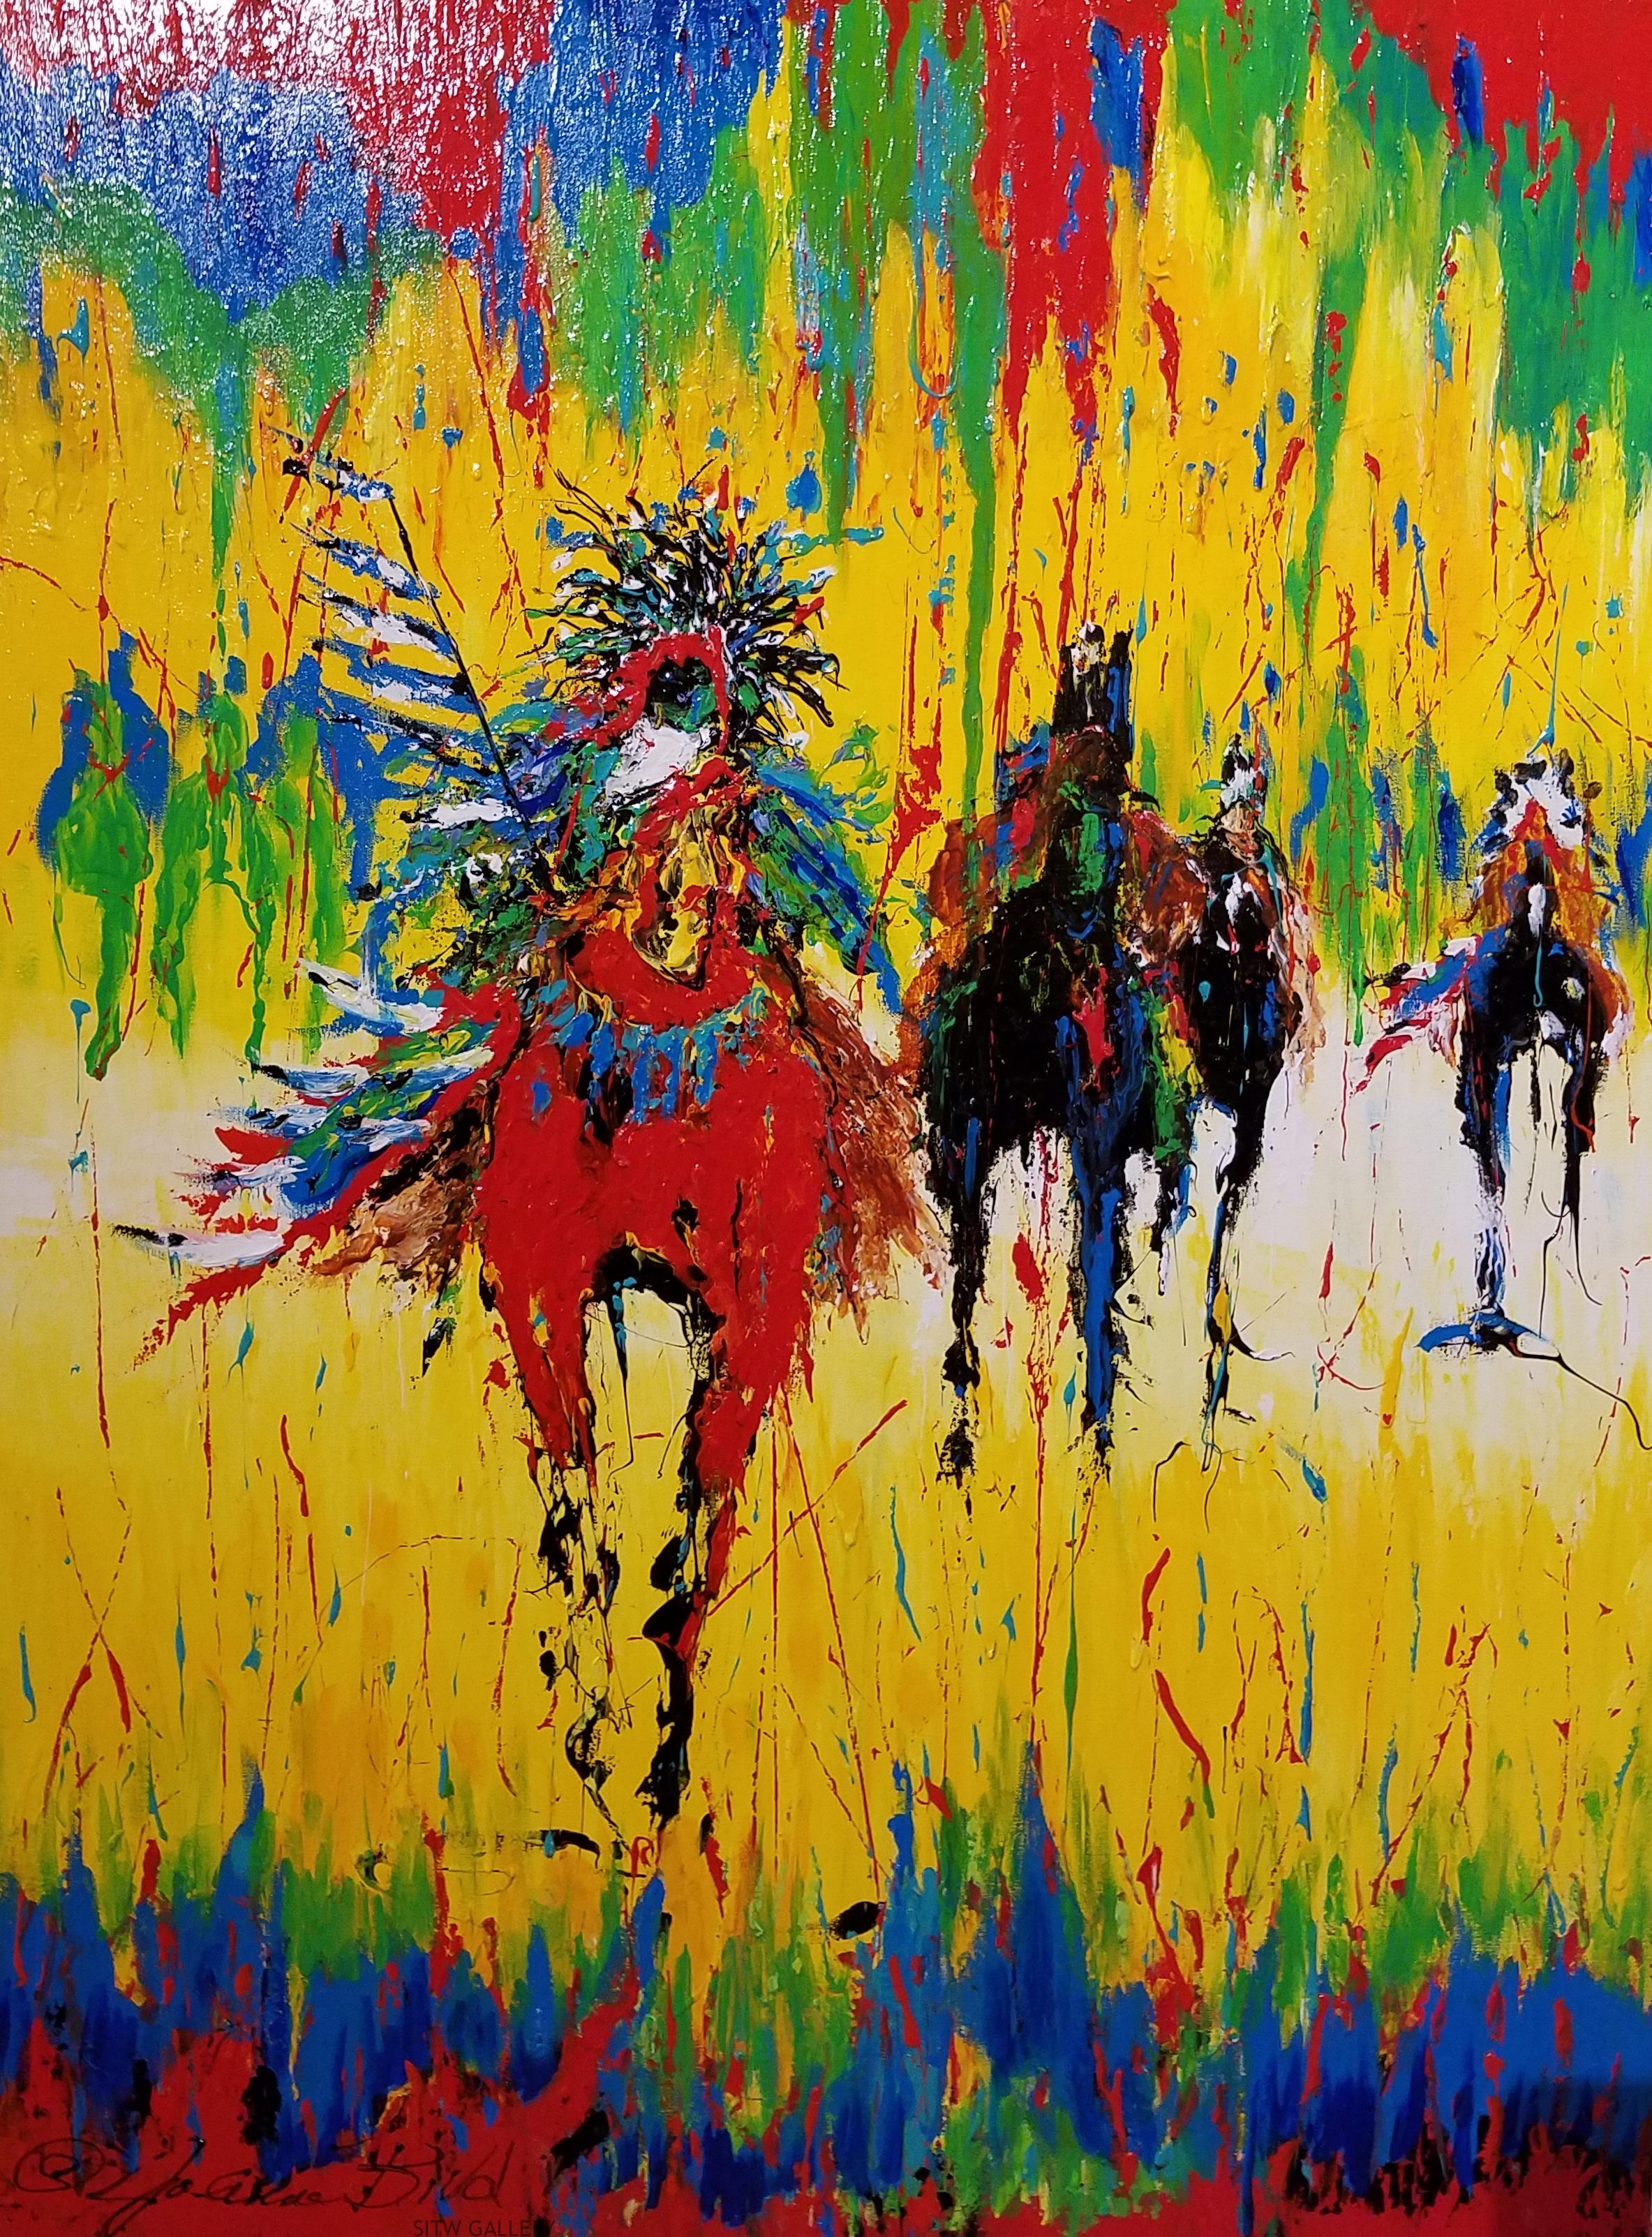 Contemporary Western Art - Spirits in the Wind Gallery